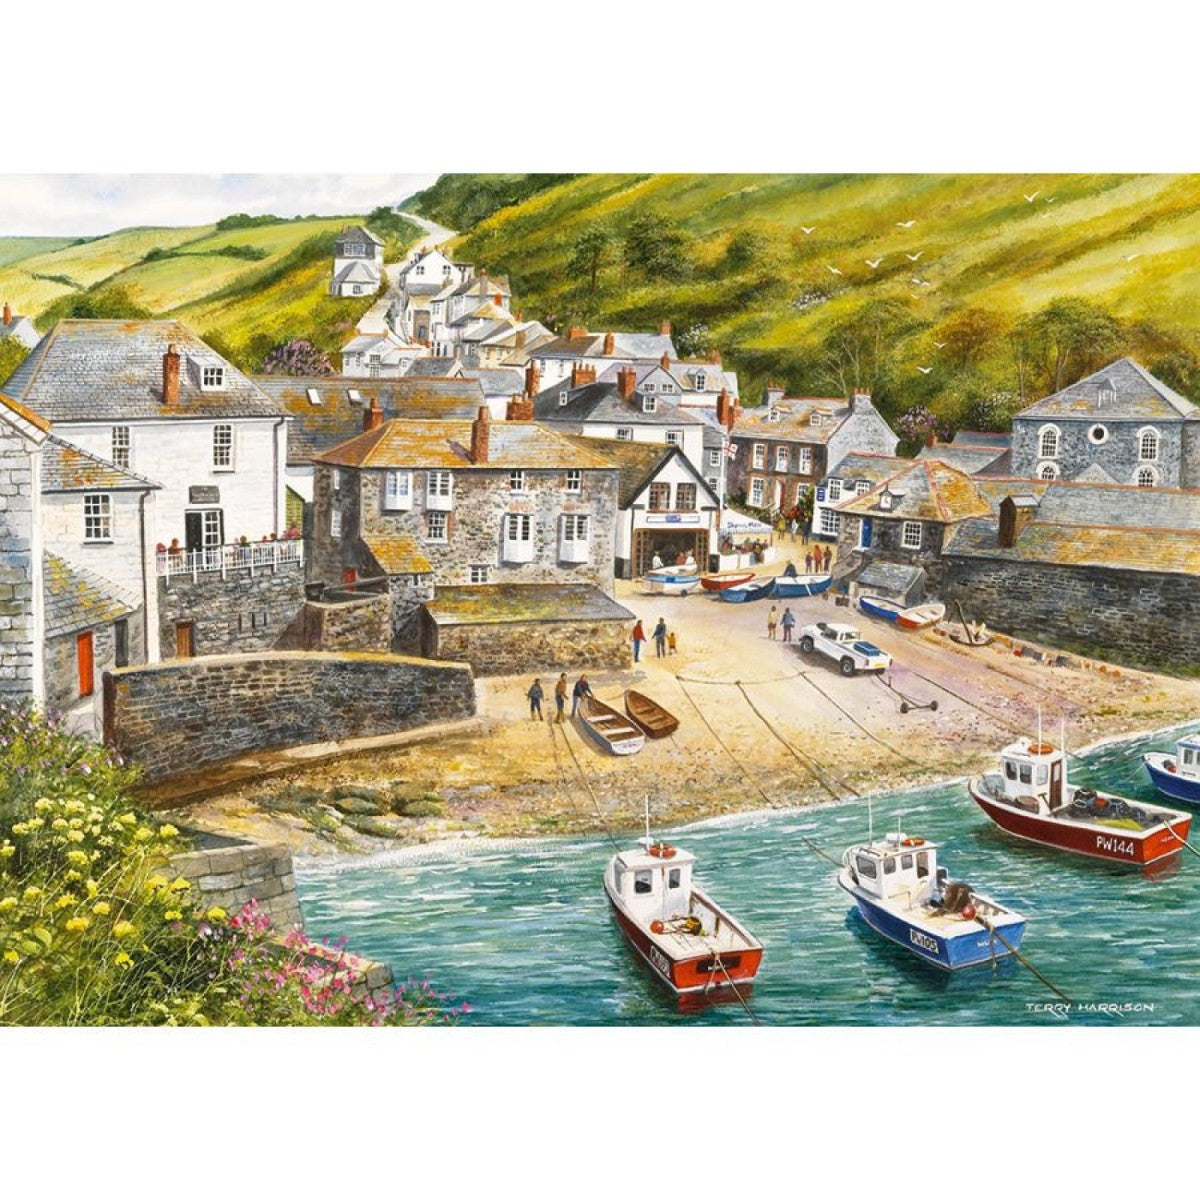 Gibsons - Port Issac - 500 Piece Jigsaw Puzzle